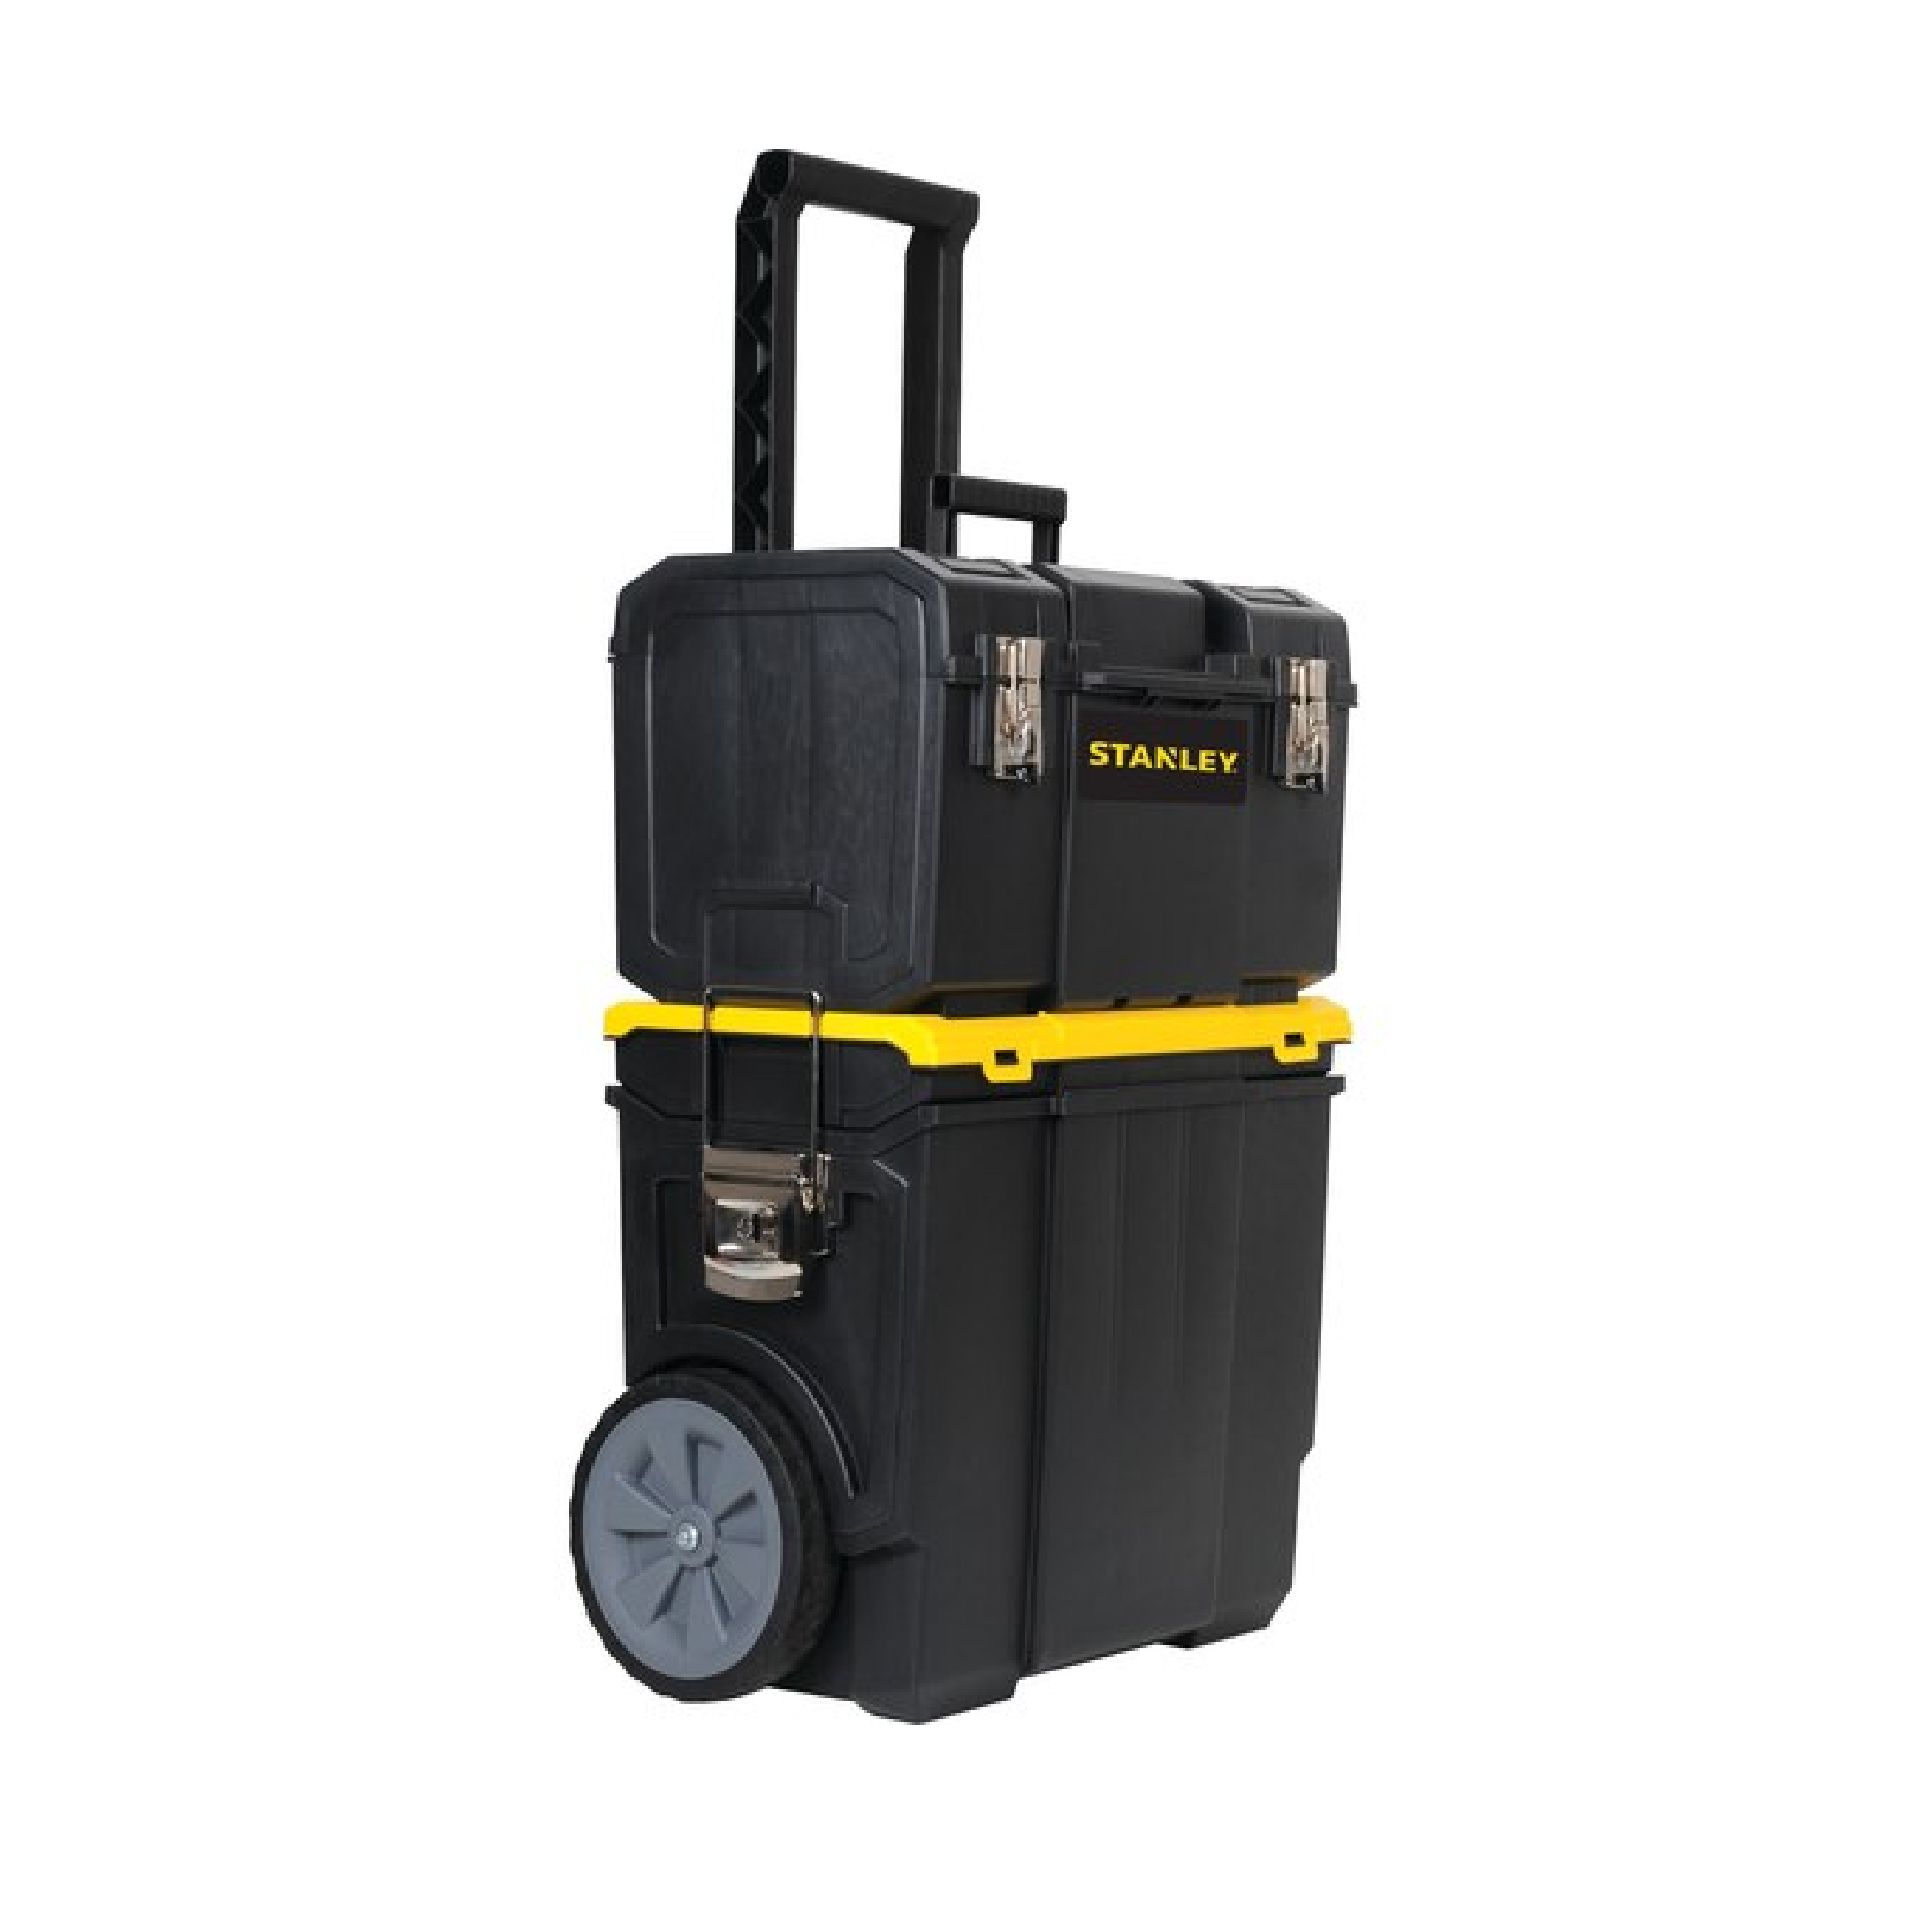 Stanley STST18613, 3-IN-1 Mobile Work Center, Toolbox With Wheels